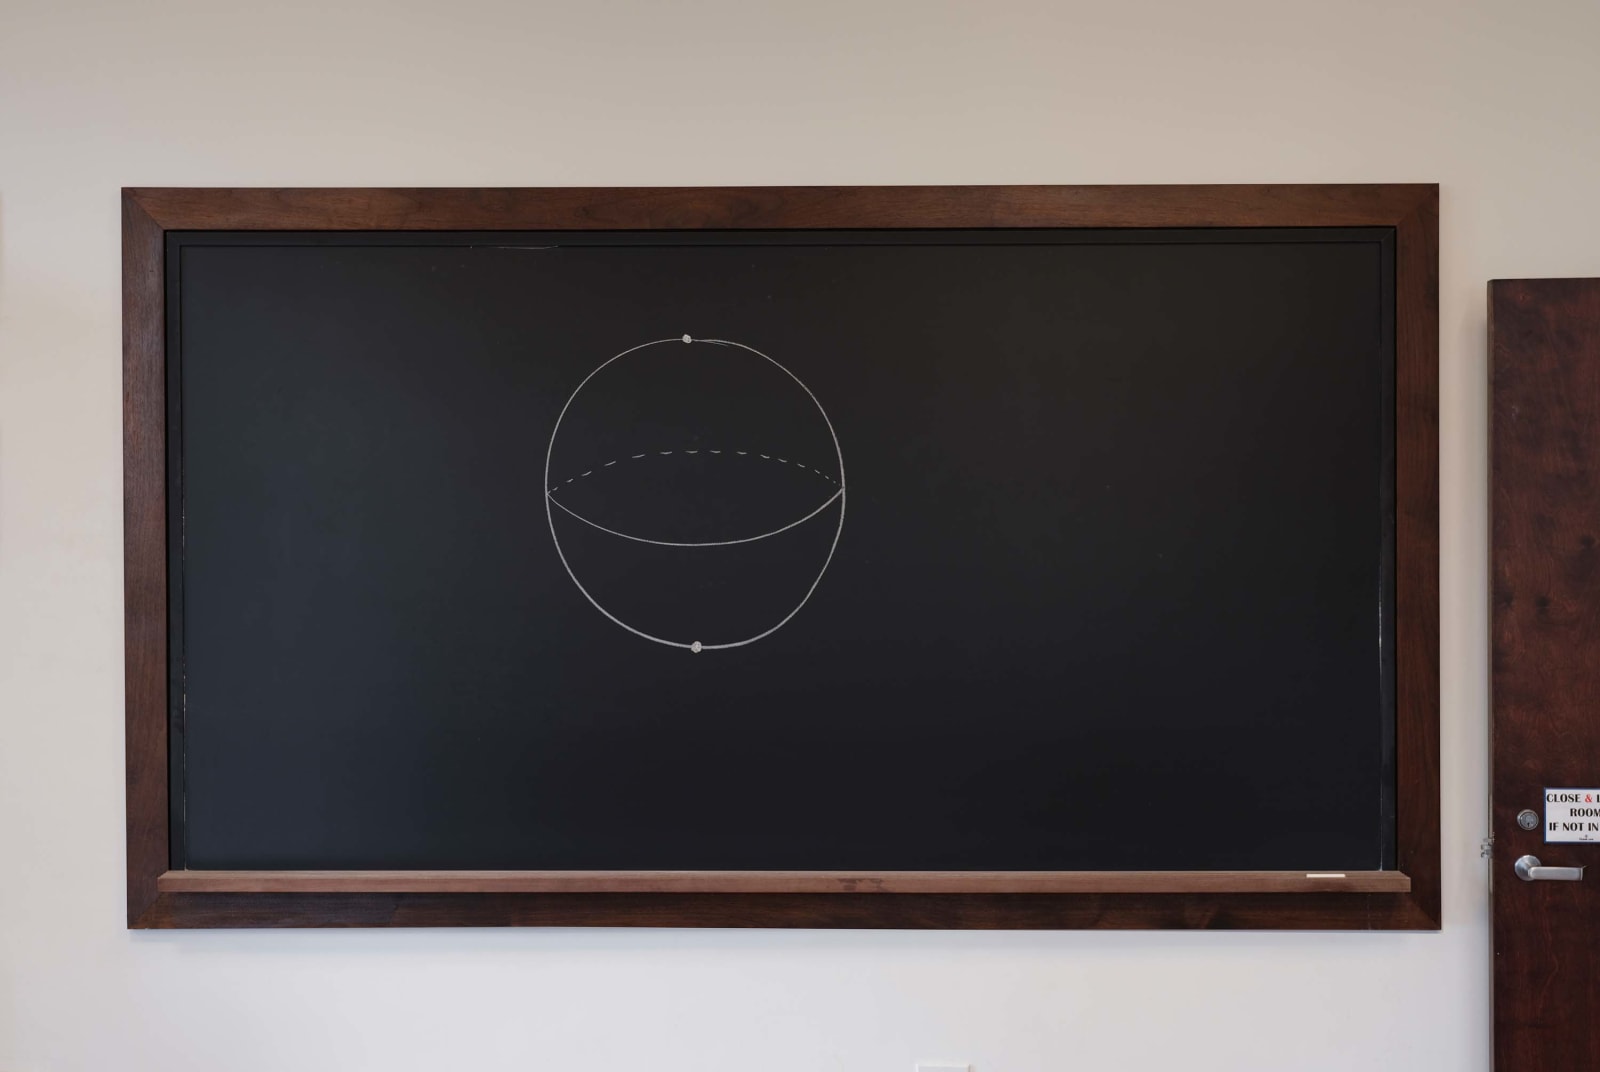 Chalkboard with formula depicting how not to draw a sphere by Philip Ording, from the Do Not Erase series by Jessica Wynne